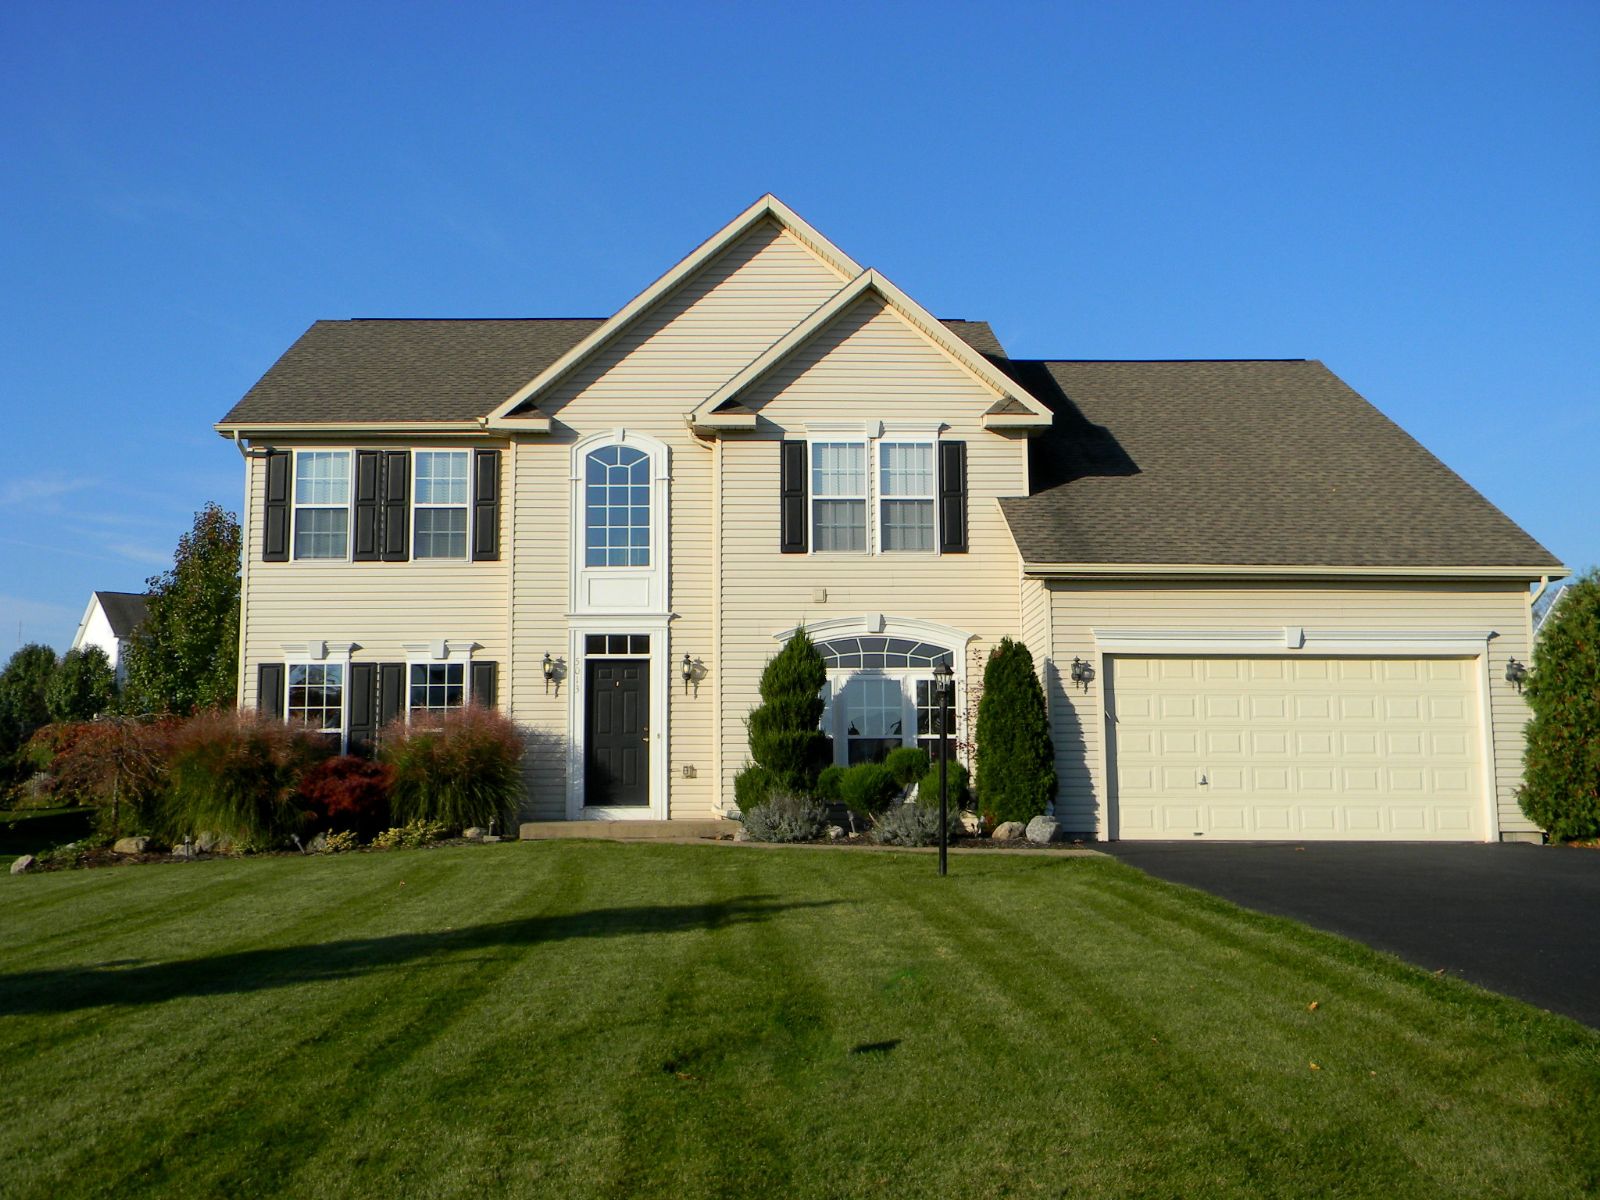 Houses In Syracuse New York - Architectural Designs